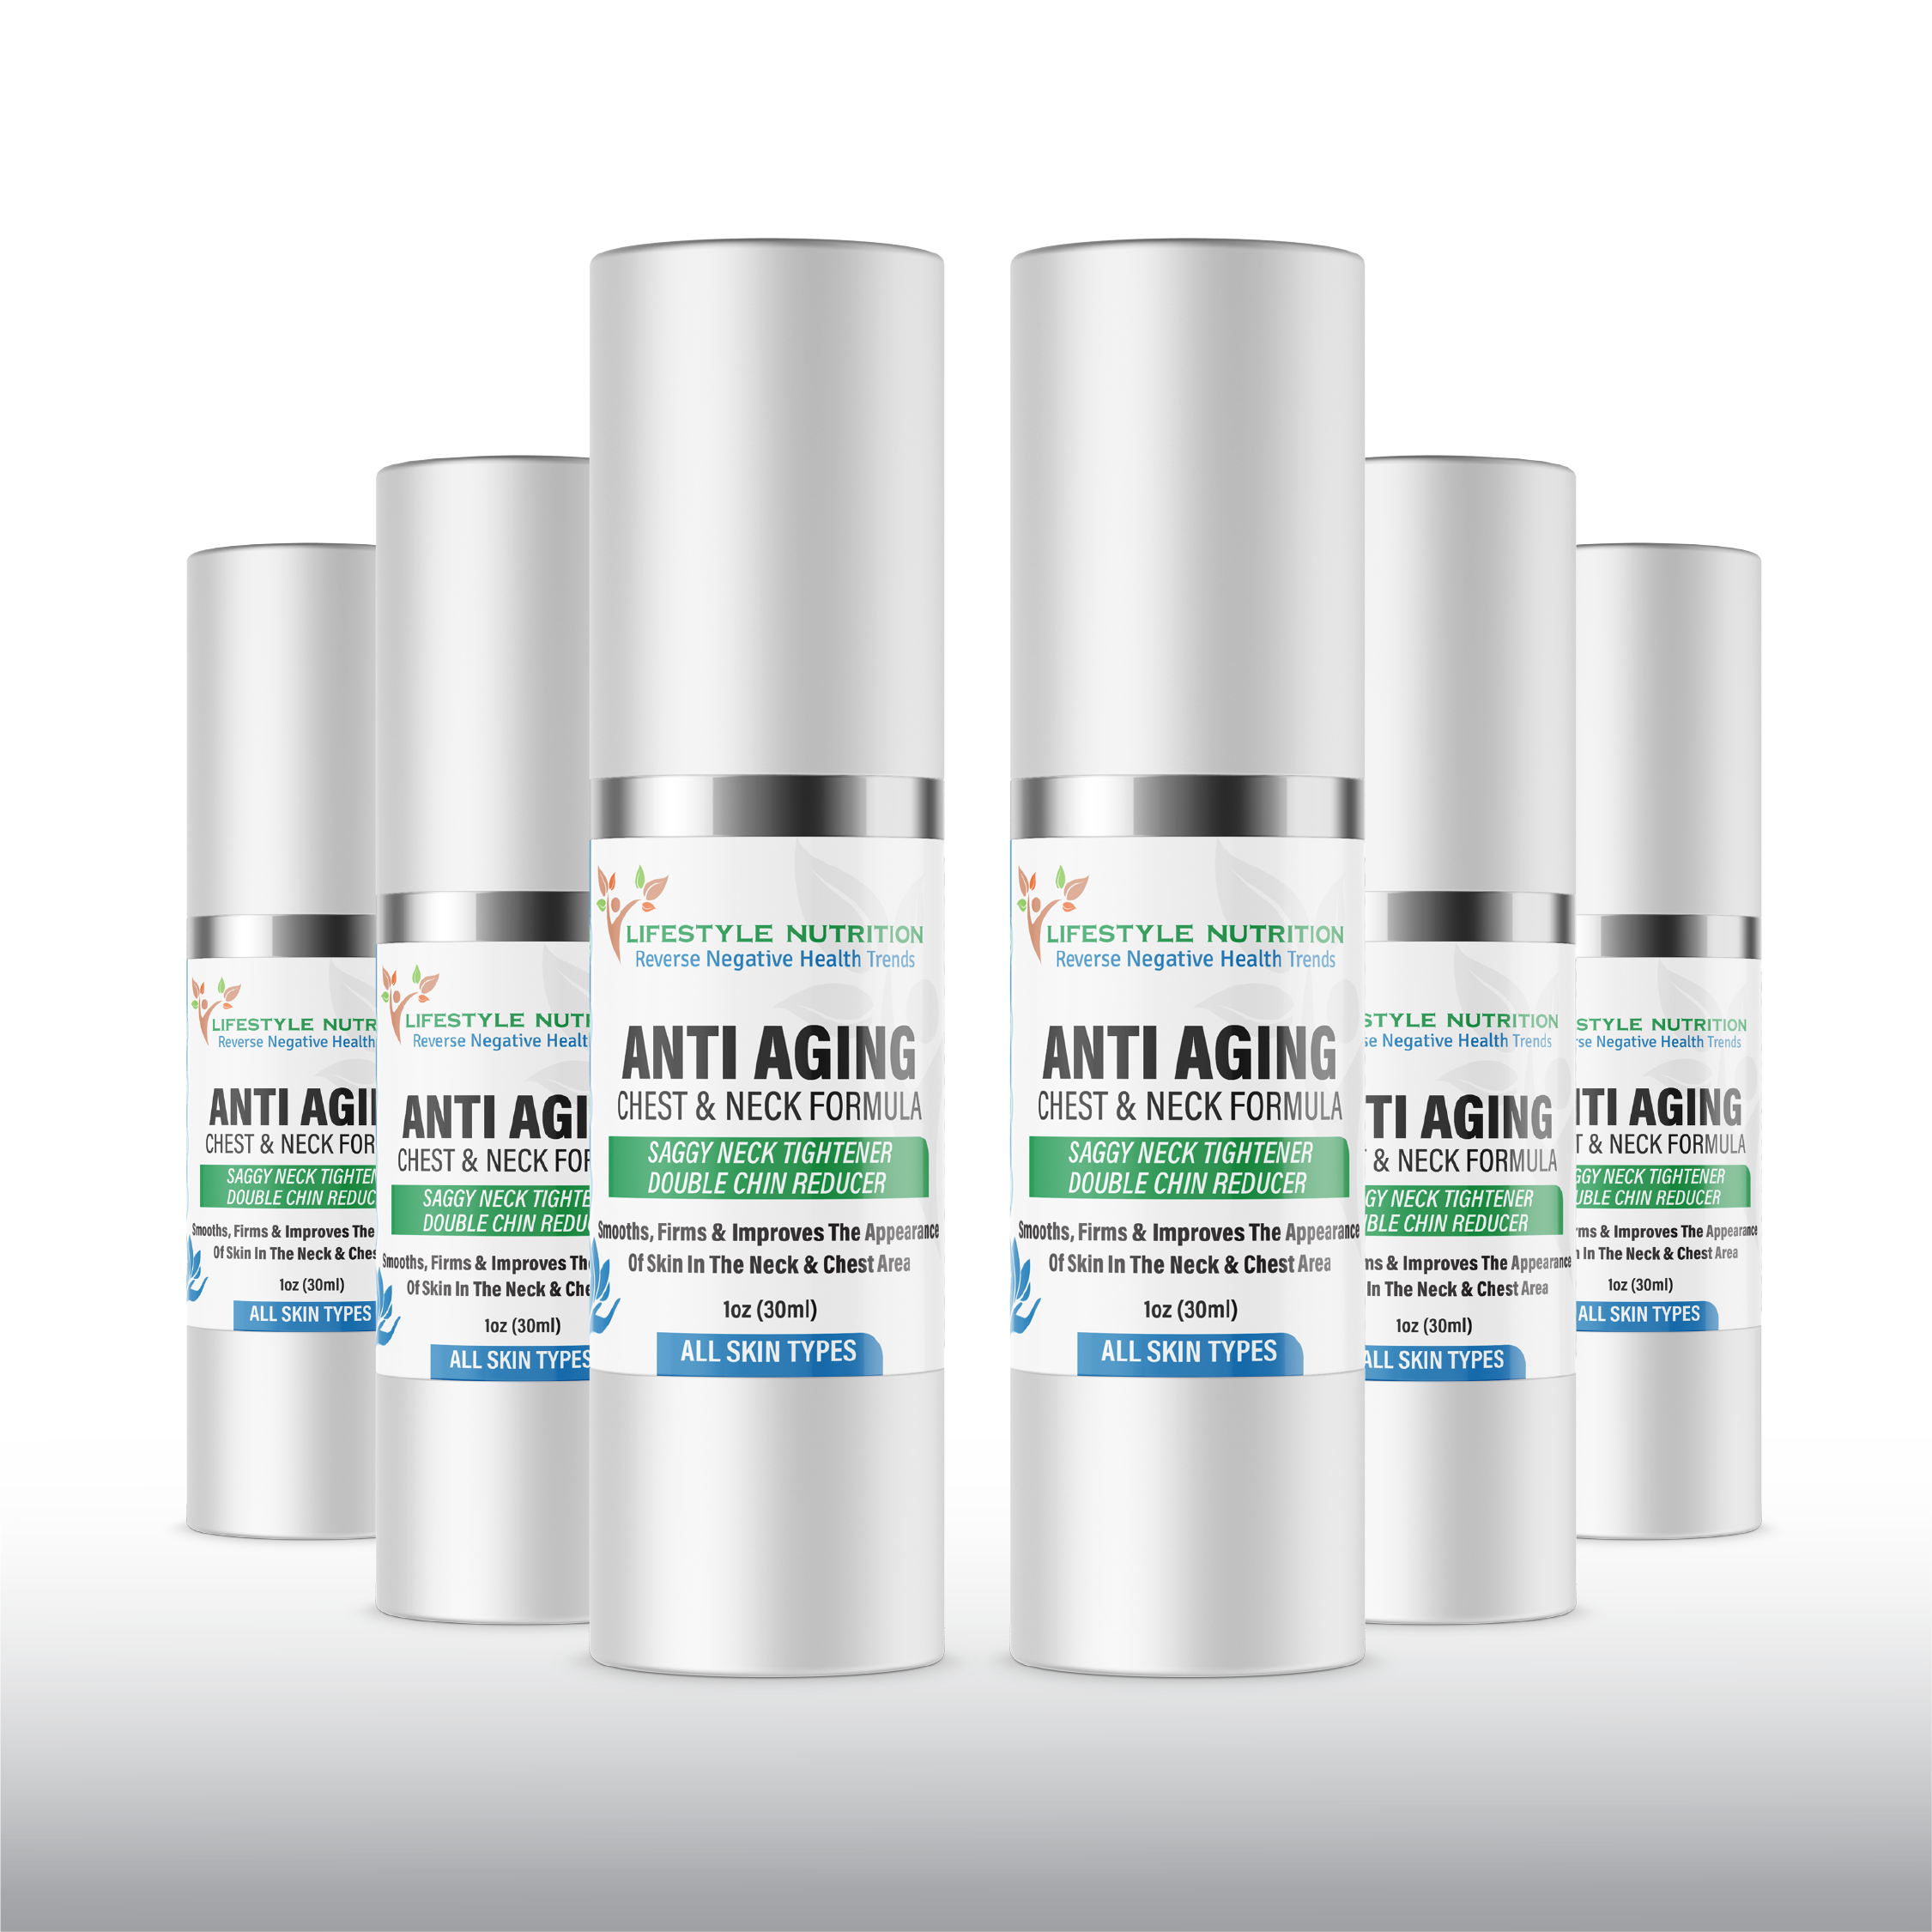 ANTI-AGING CHEST & NECK FORMULA (6-Pack)